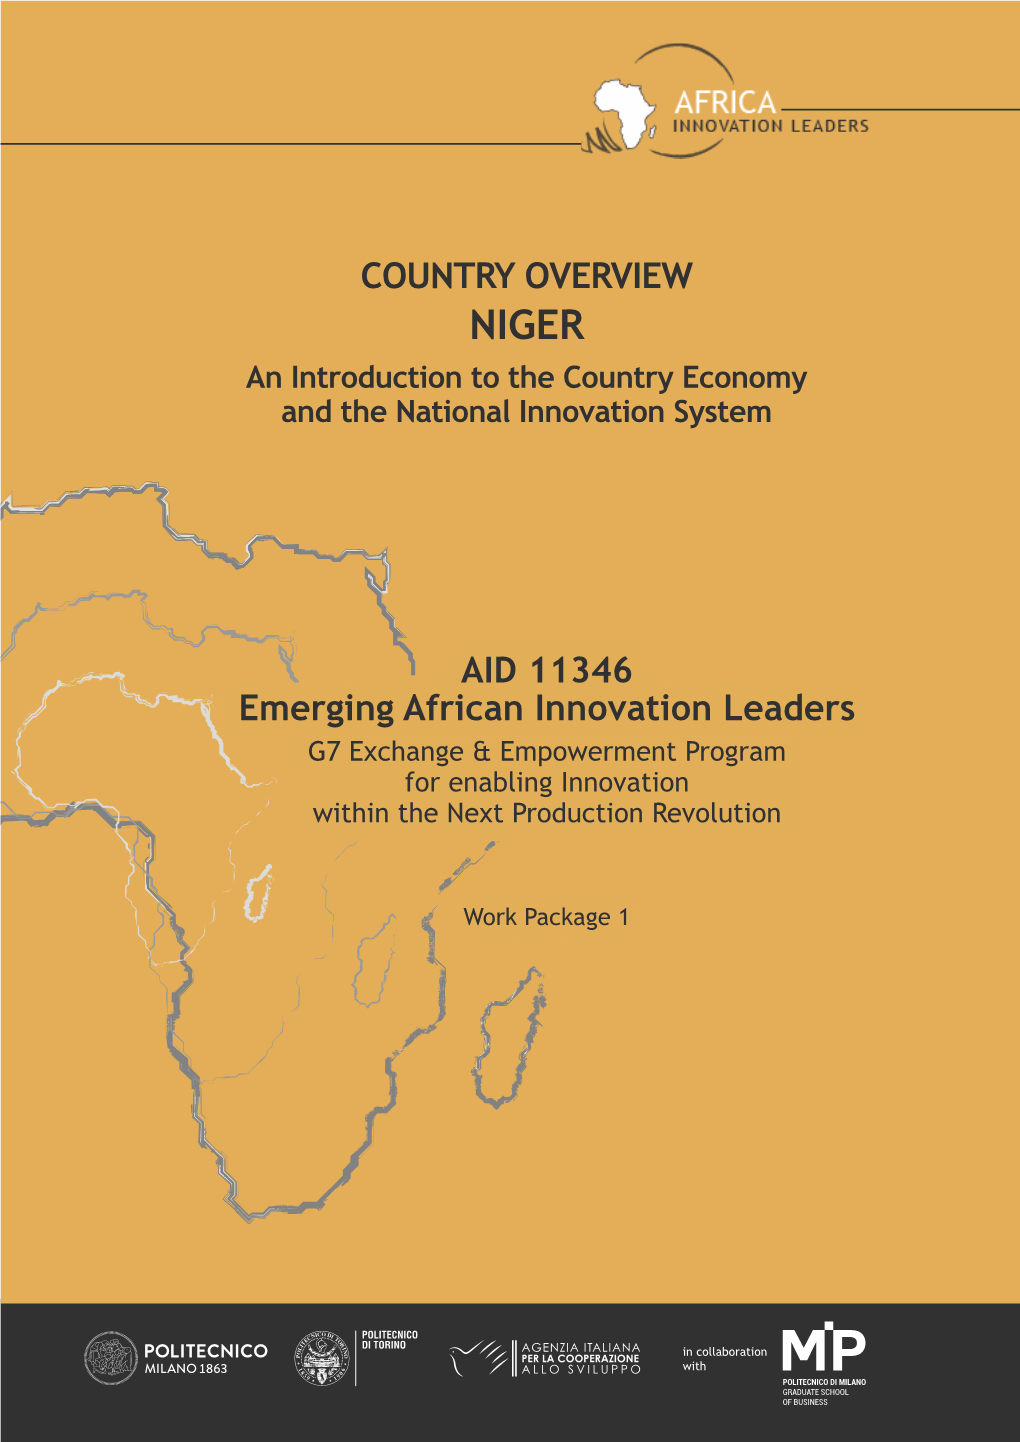 NIGER an Introduction to the Country Economy and the National Innovation System